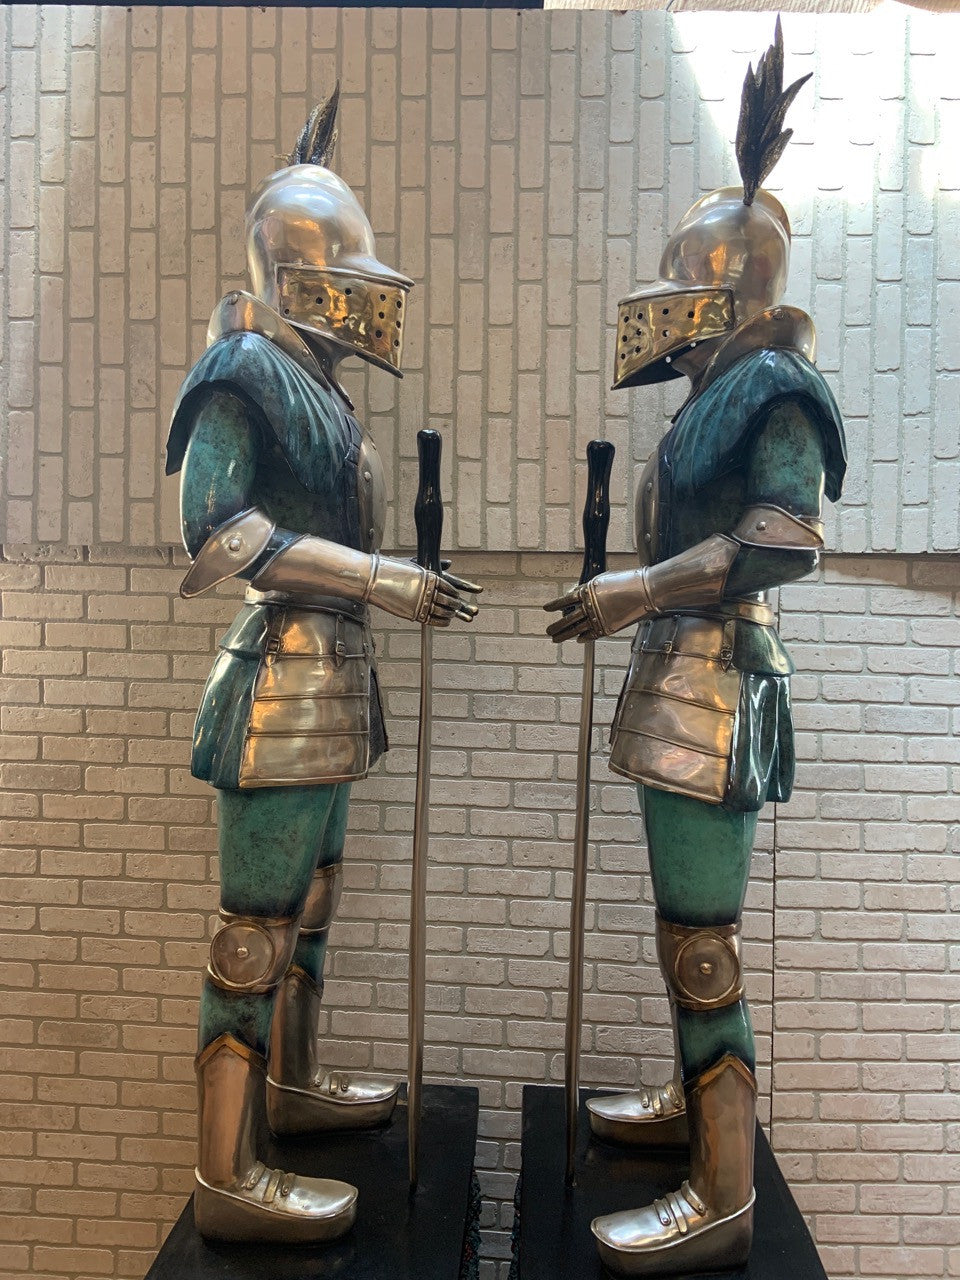 Life Size Medieval Knight Statues Casting Antique Metal Bronze Knight with Sword Statue Glazed Patina on Mounted Bronze Stands - Pair